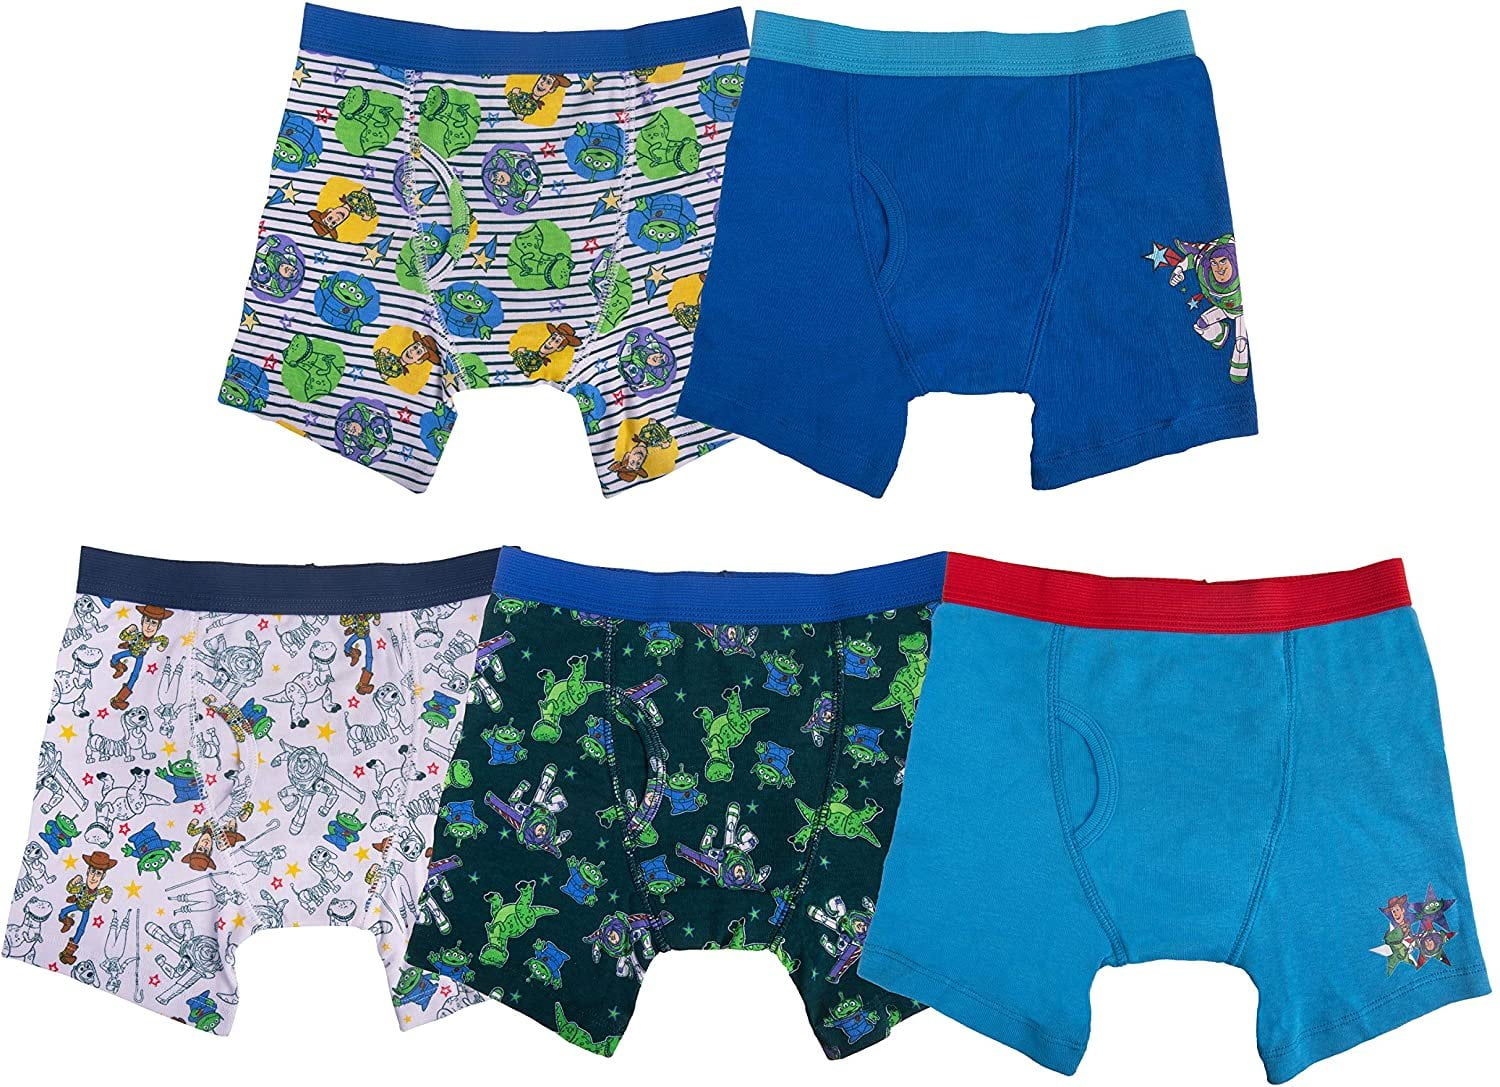 Buy Disney Toy Story Boys Pants, Pack of 6 Briefs with Your Favourite  Characters Buzz Lightyear and Woody Toy Story, 100% Soft Cotton Boys  Underwear, Gifts for Boys Toddlers Age 2-6 Years (